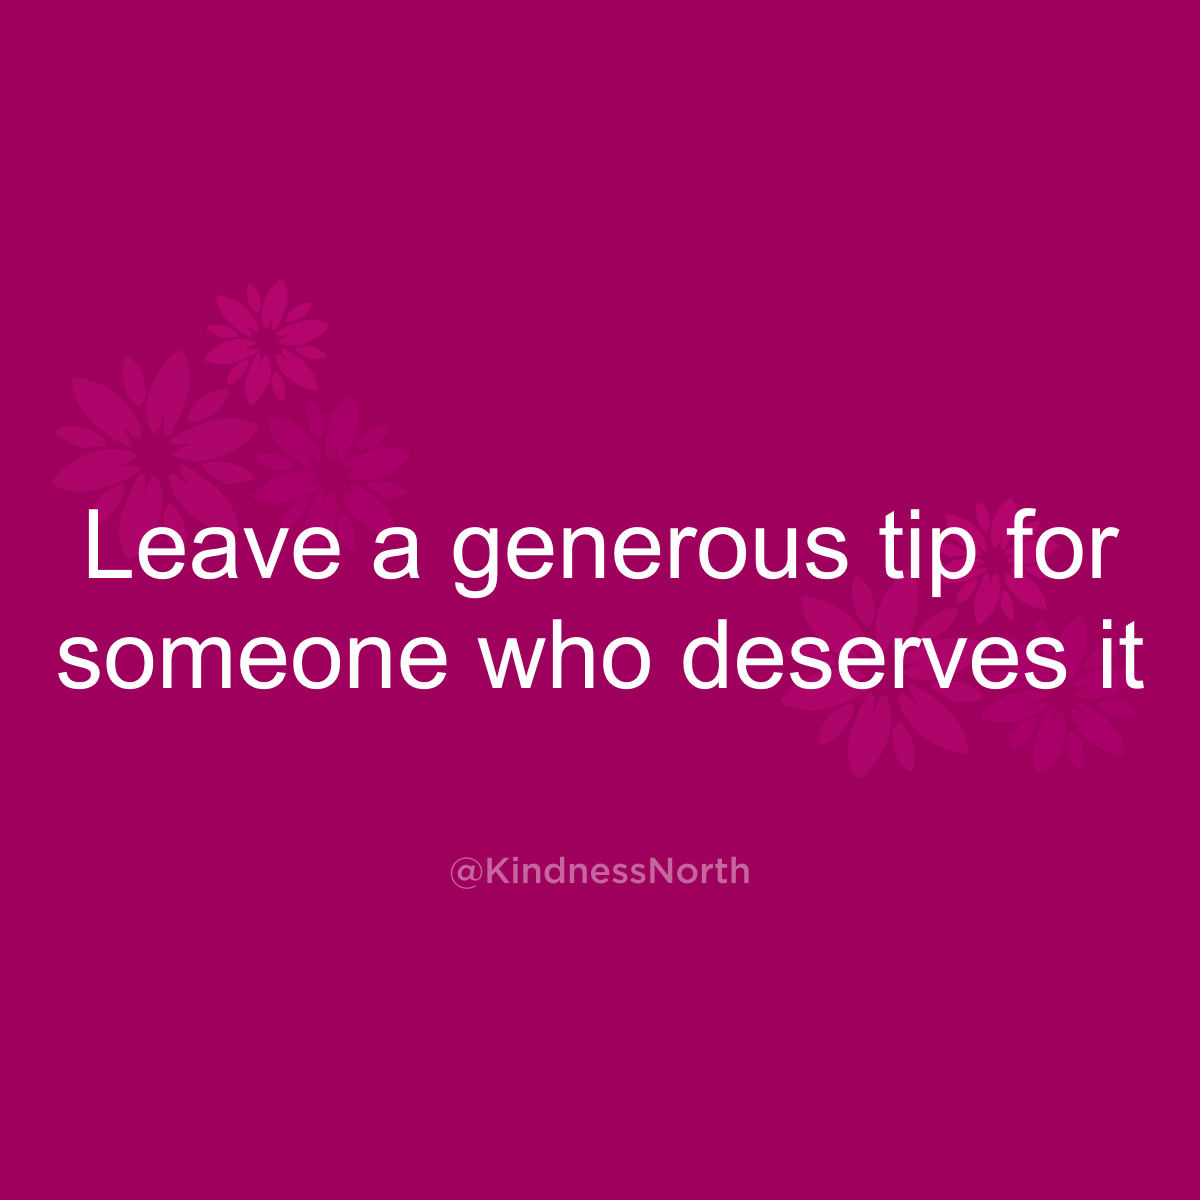 Leave a generous tip for someone who deserves it